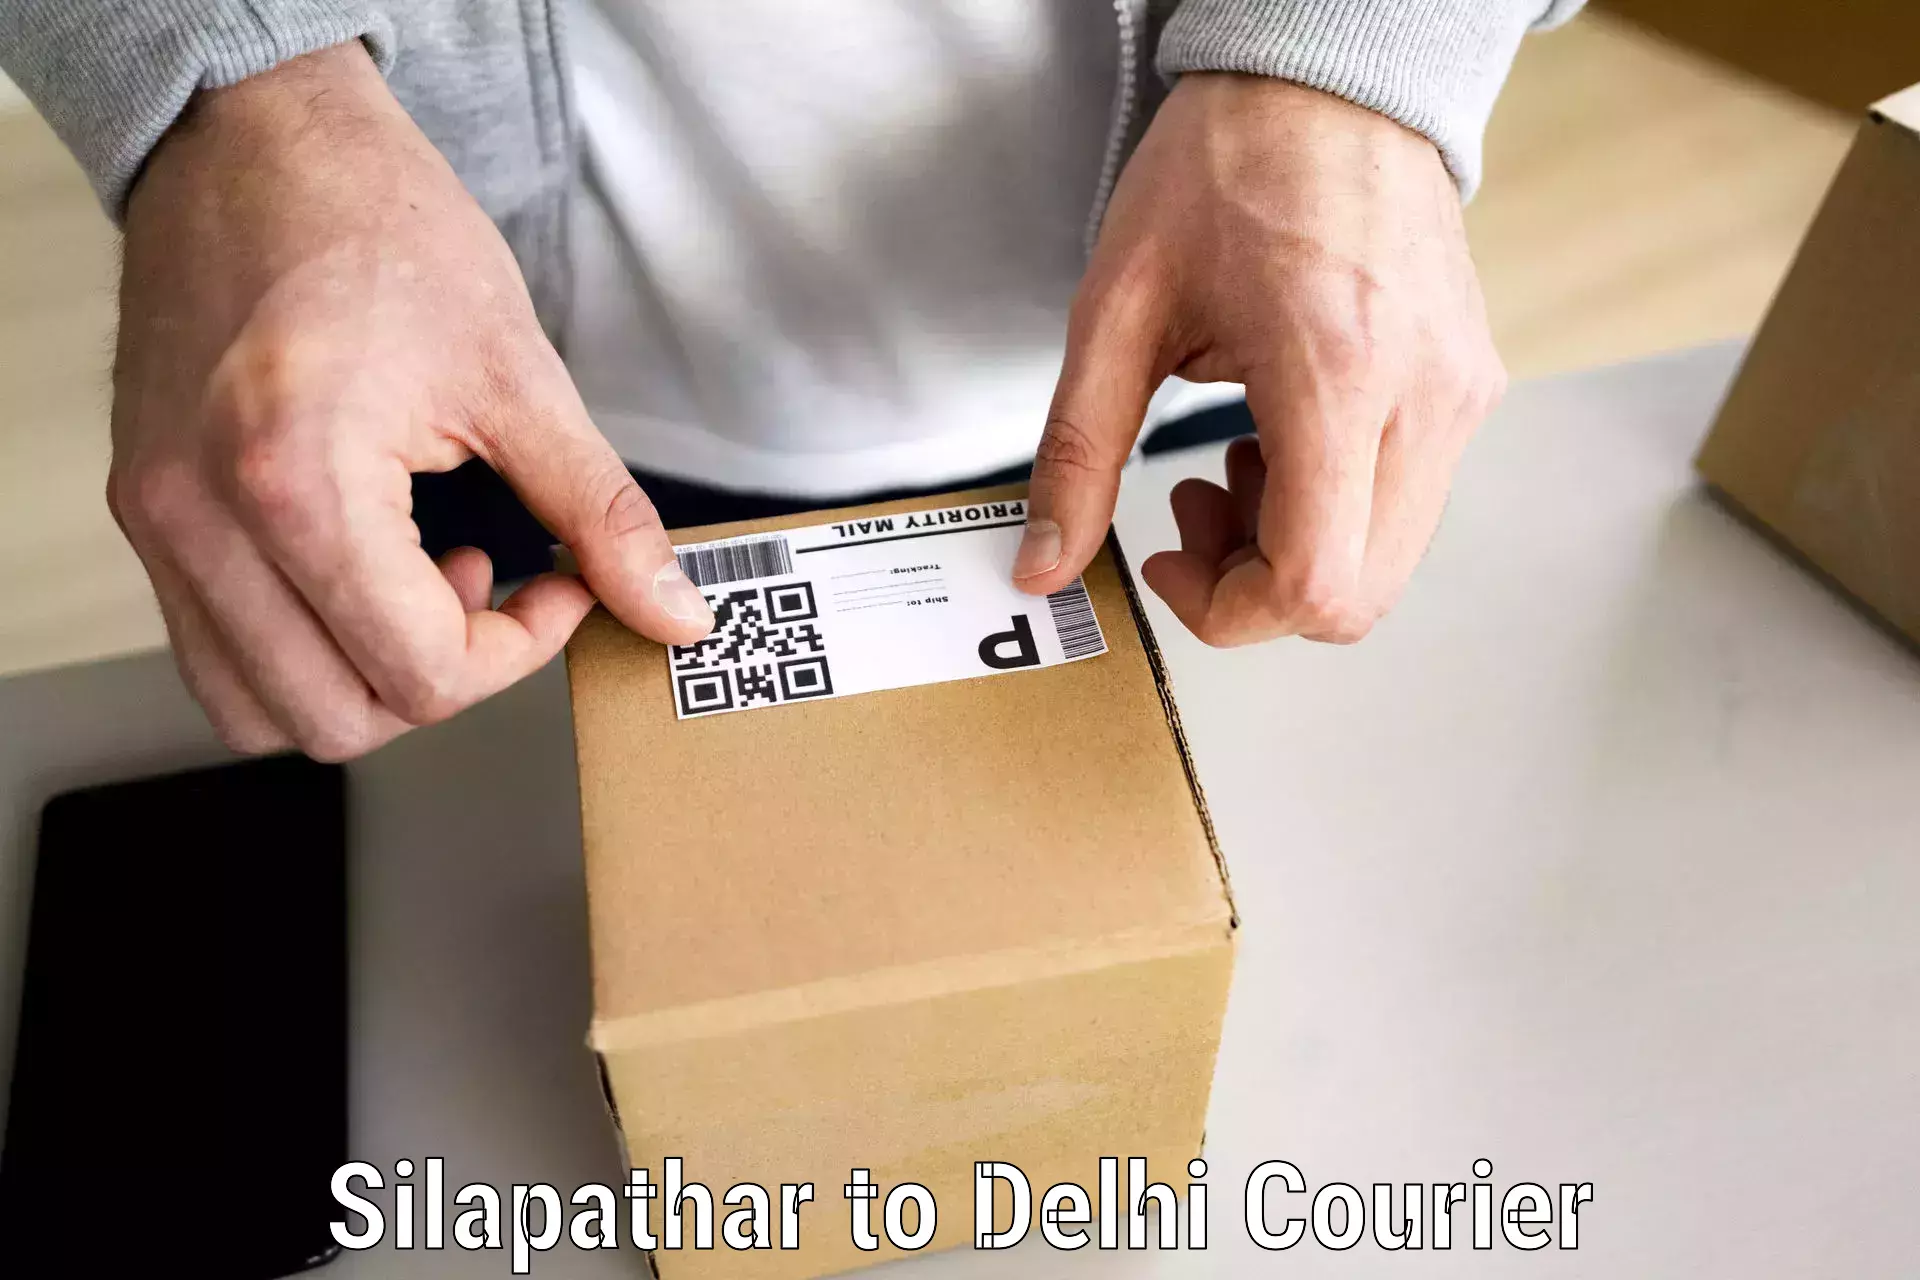 Reliable movers Silapathar to University of Delhi